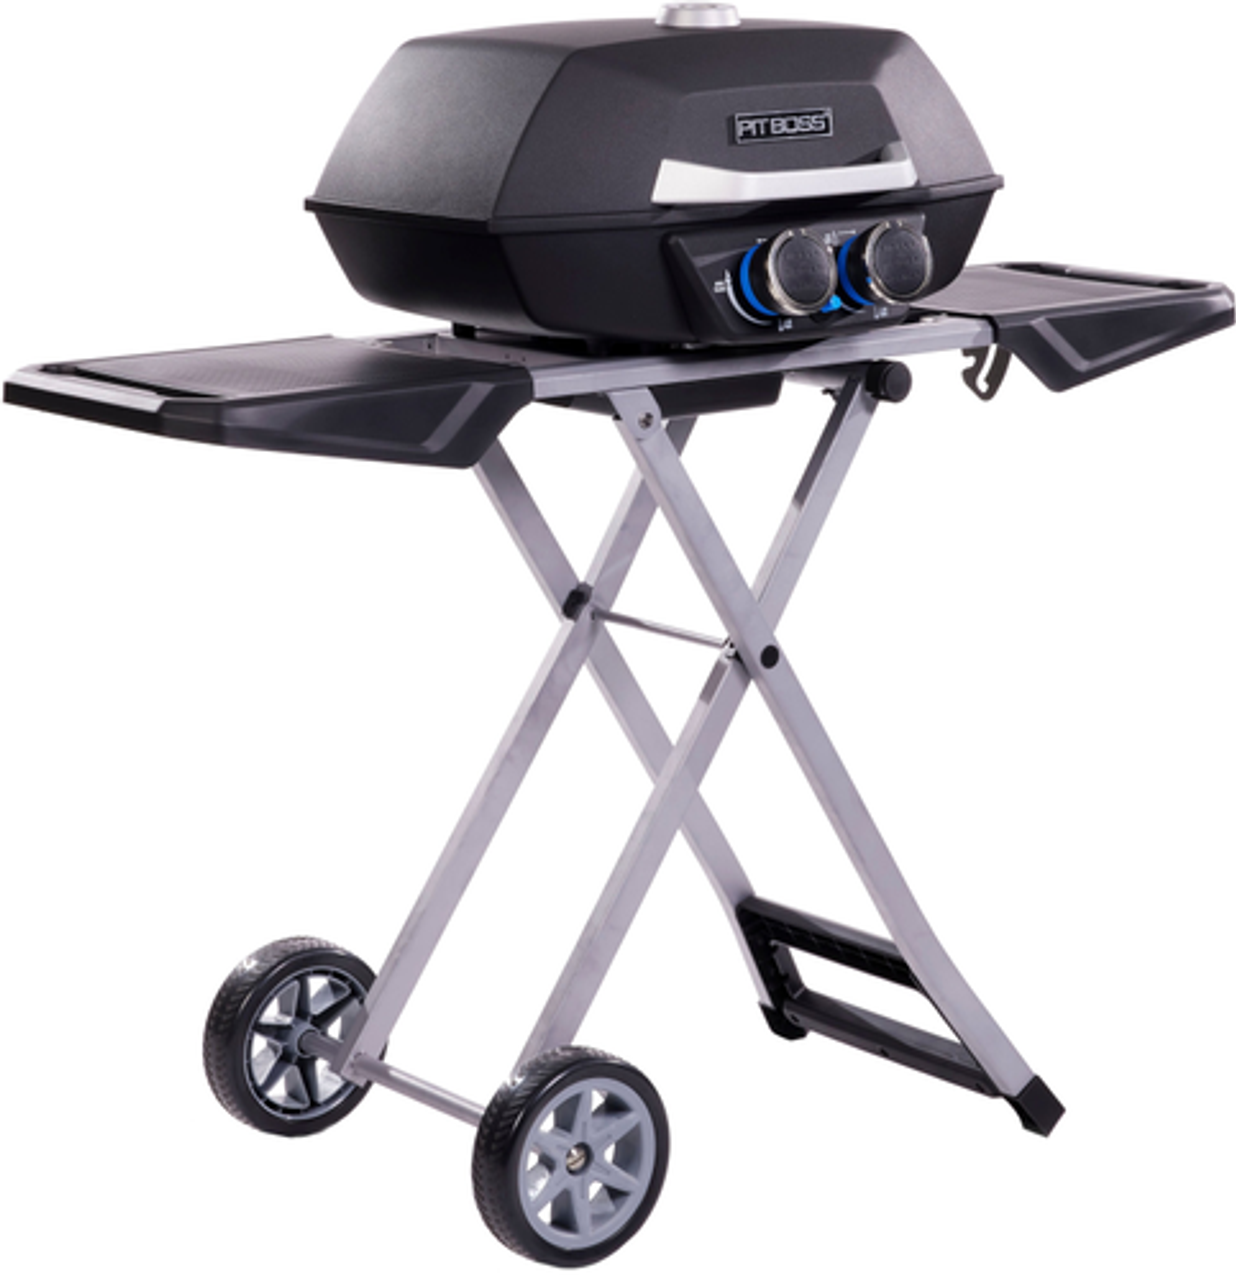 Pit Boss - 2-Burner Portable Gas Grill with Collapsible Cart - Black Sand